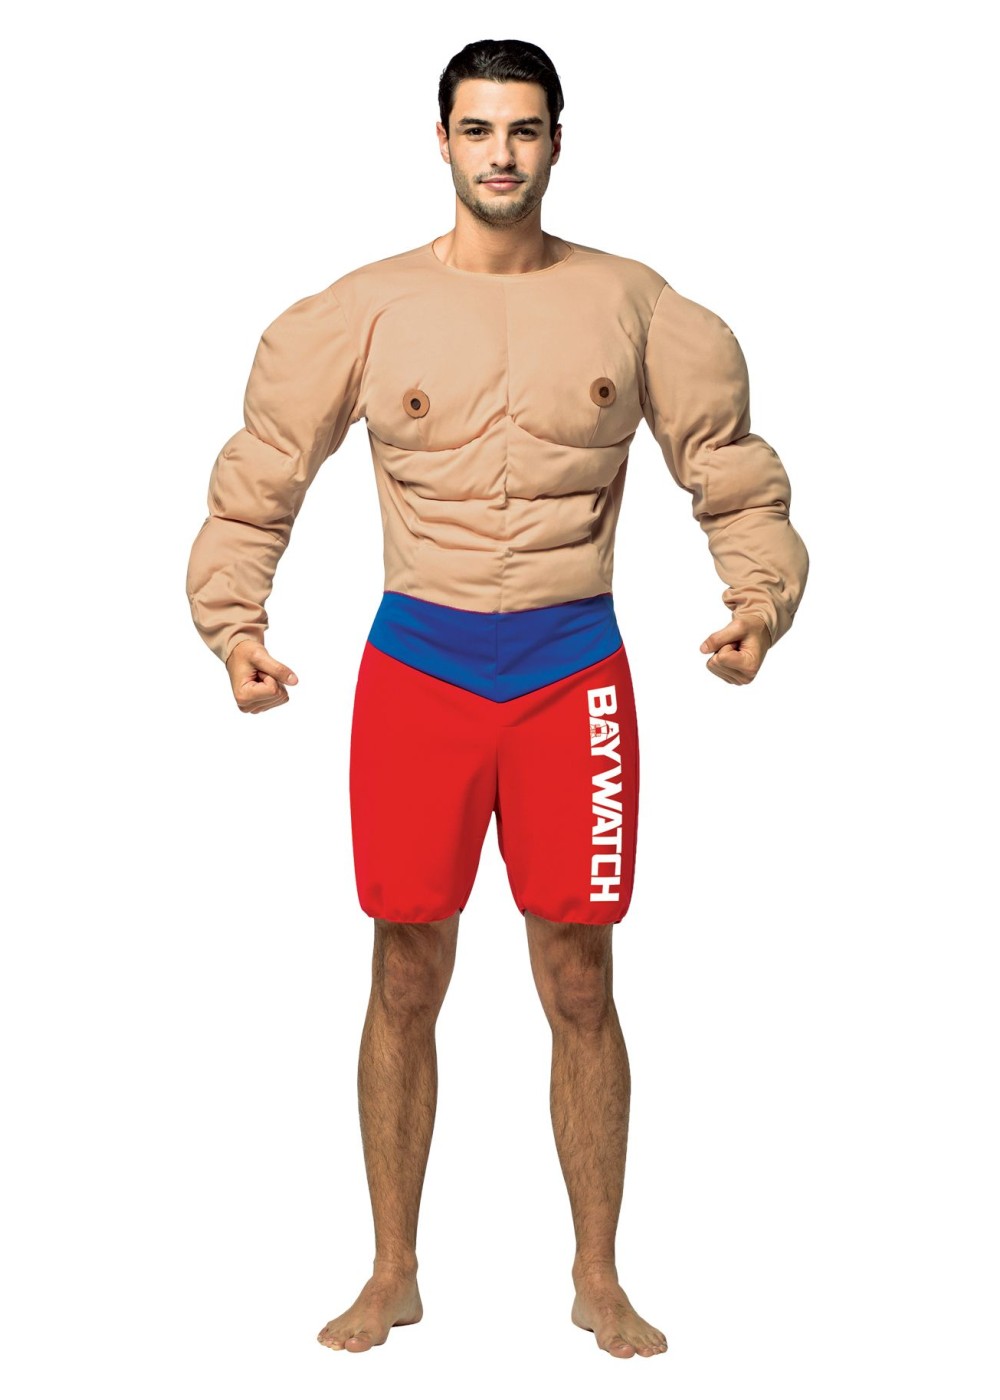 Mens Baywatch Muscled Lifeguard Costume.